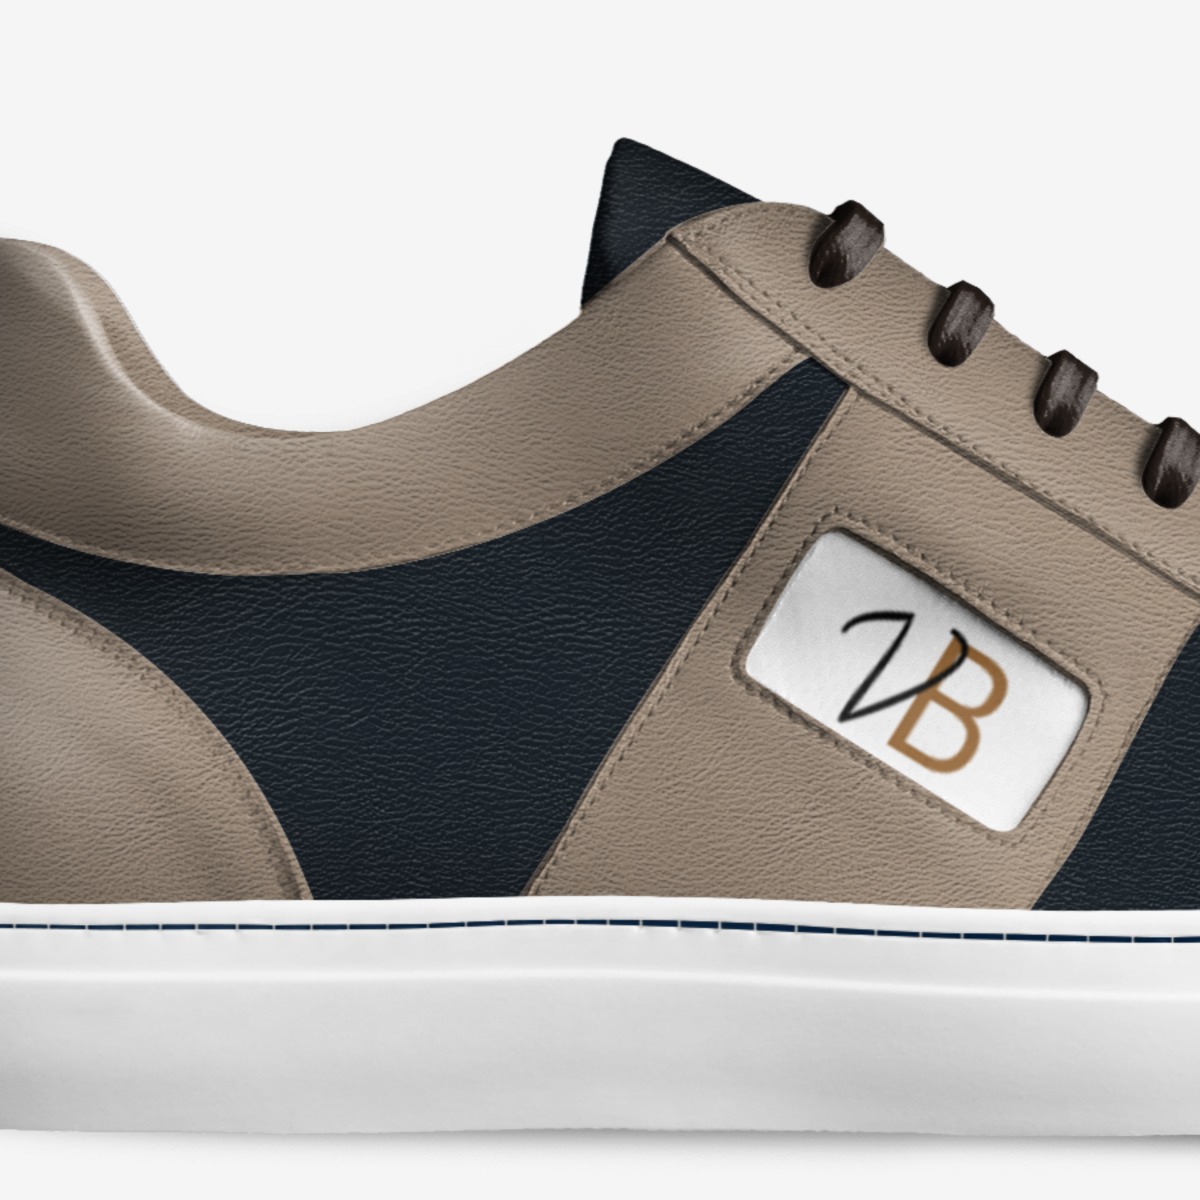 Good-looking Sneakers | A Custom Shoe concept by Vanessa K